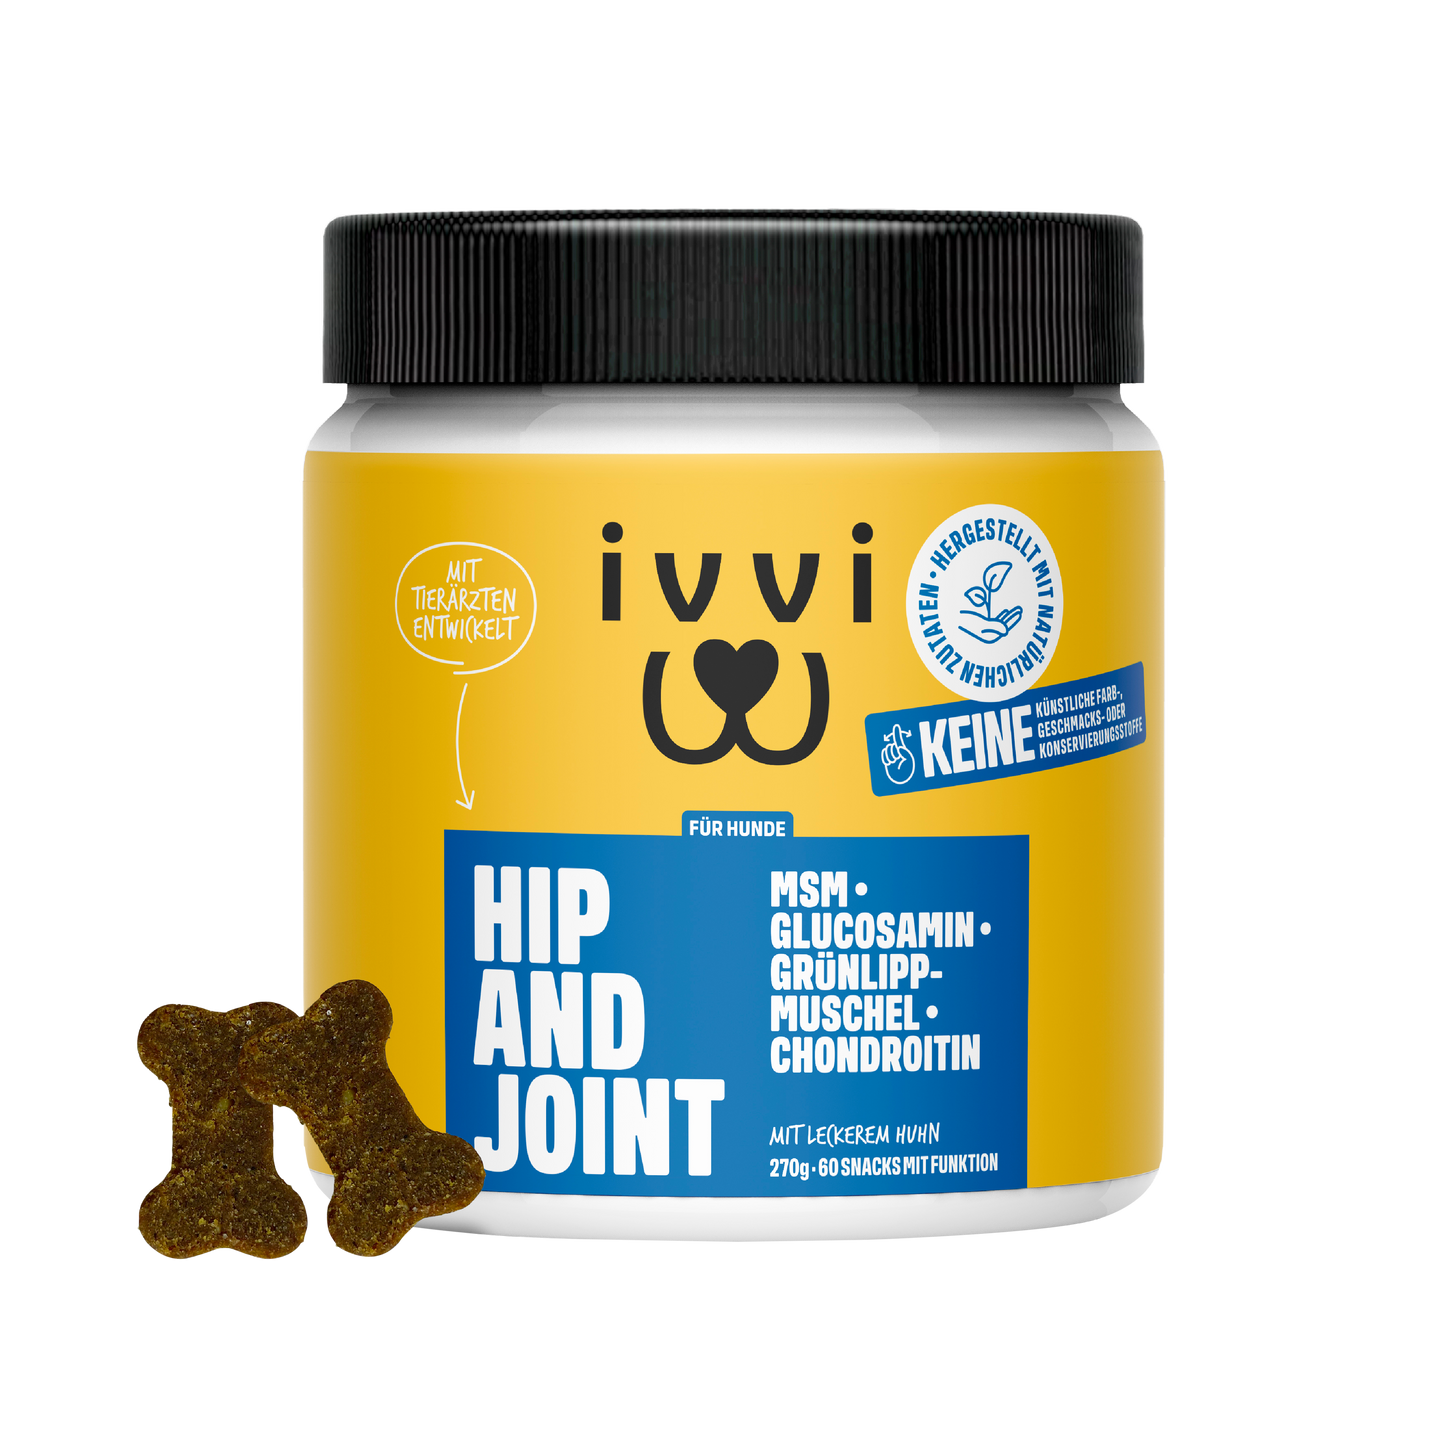 HIP AND JOINT